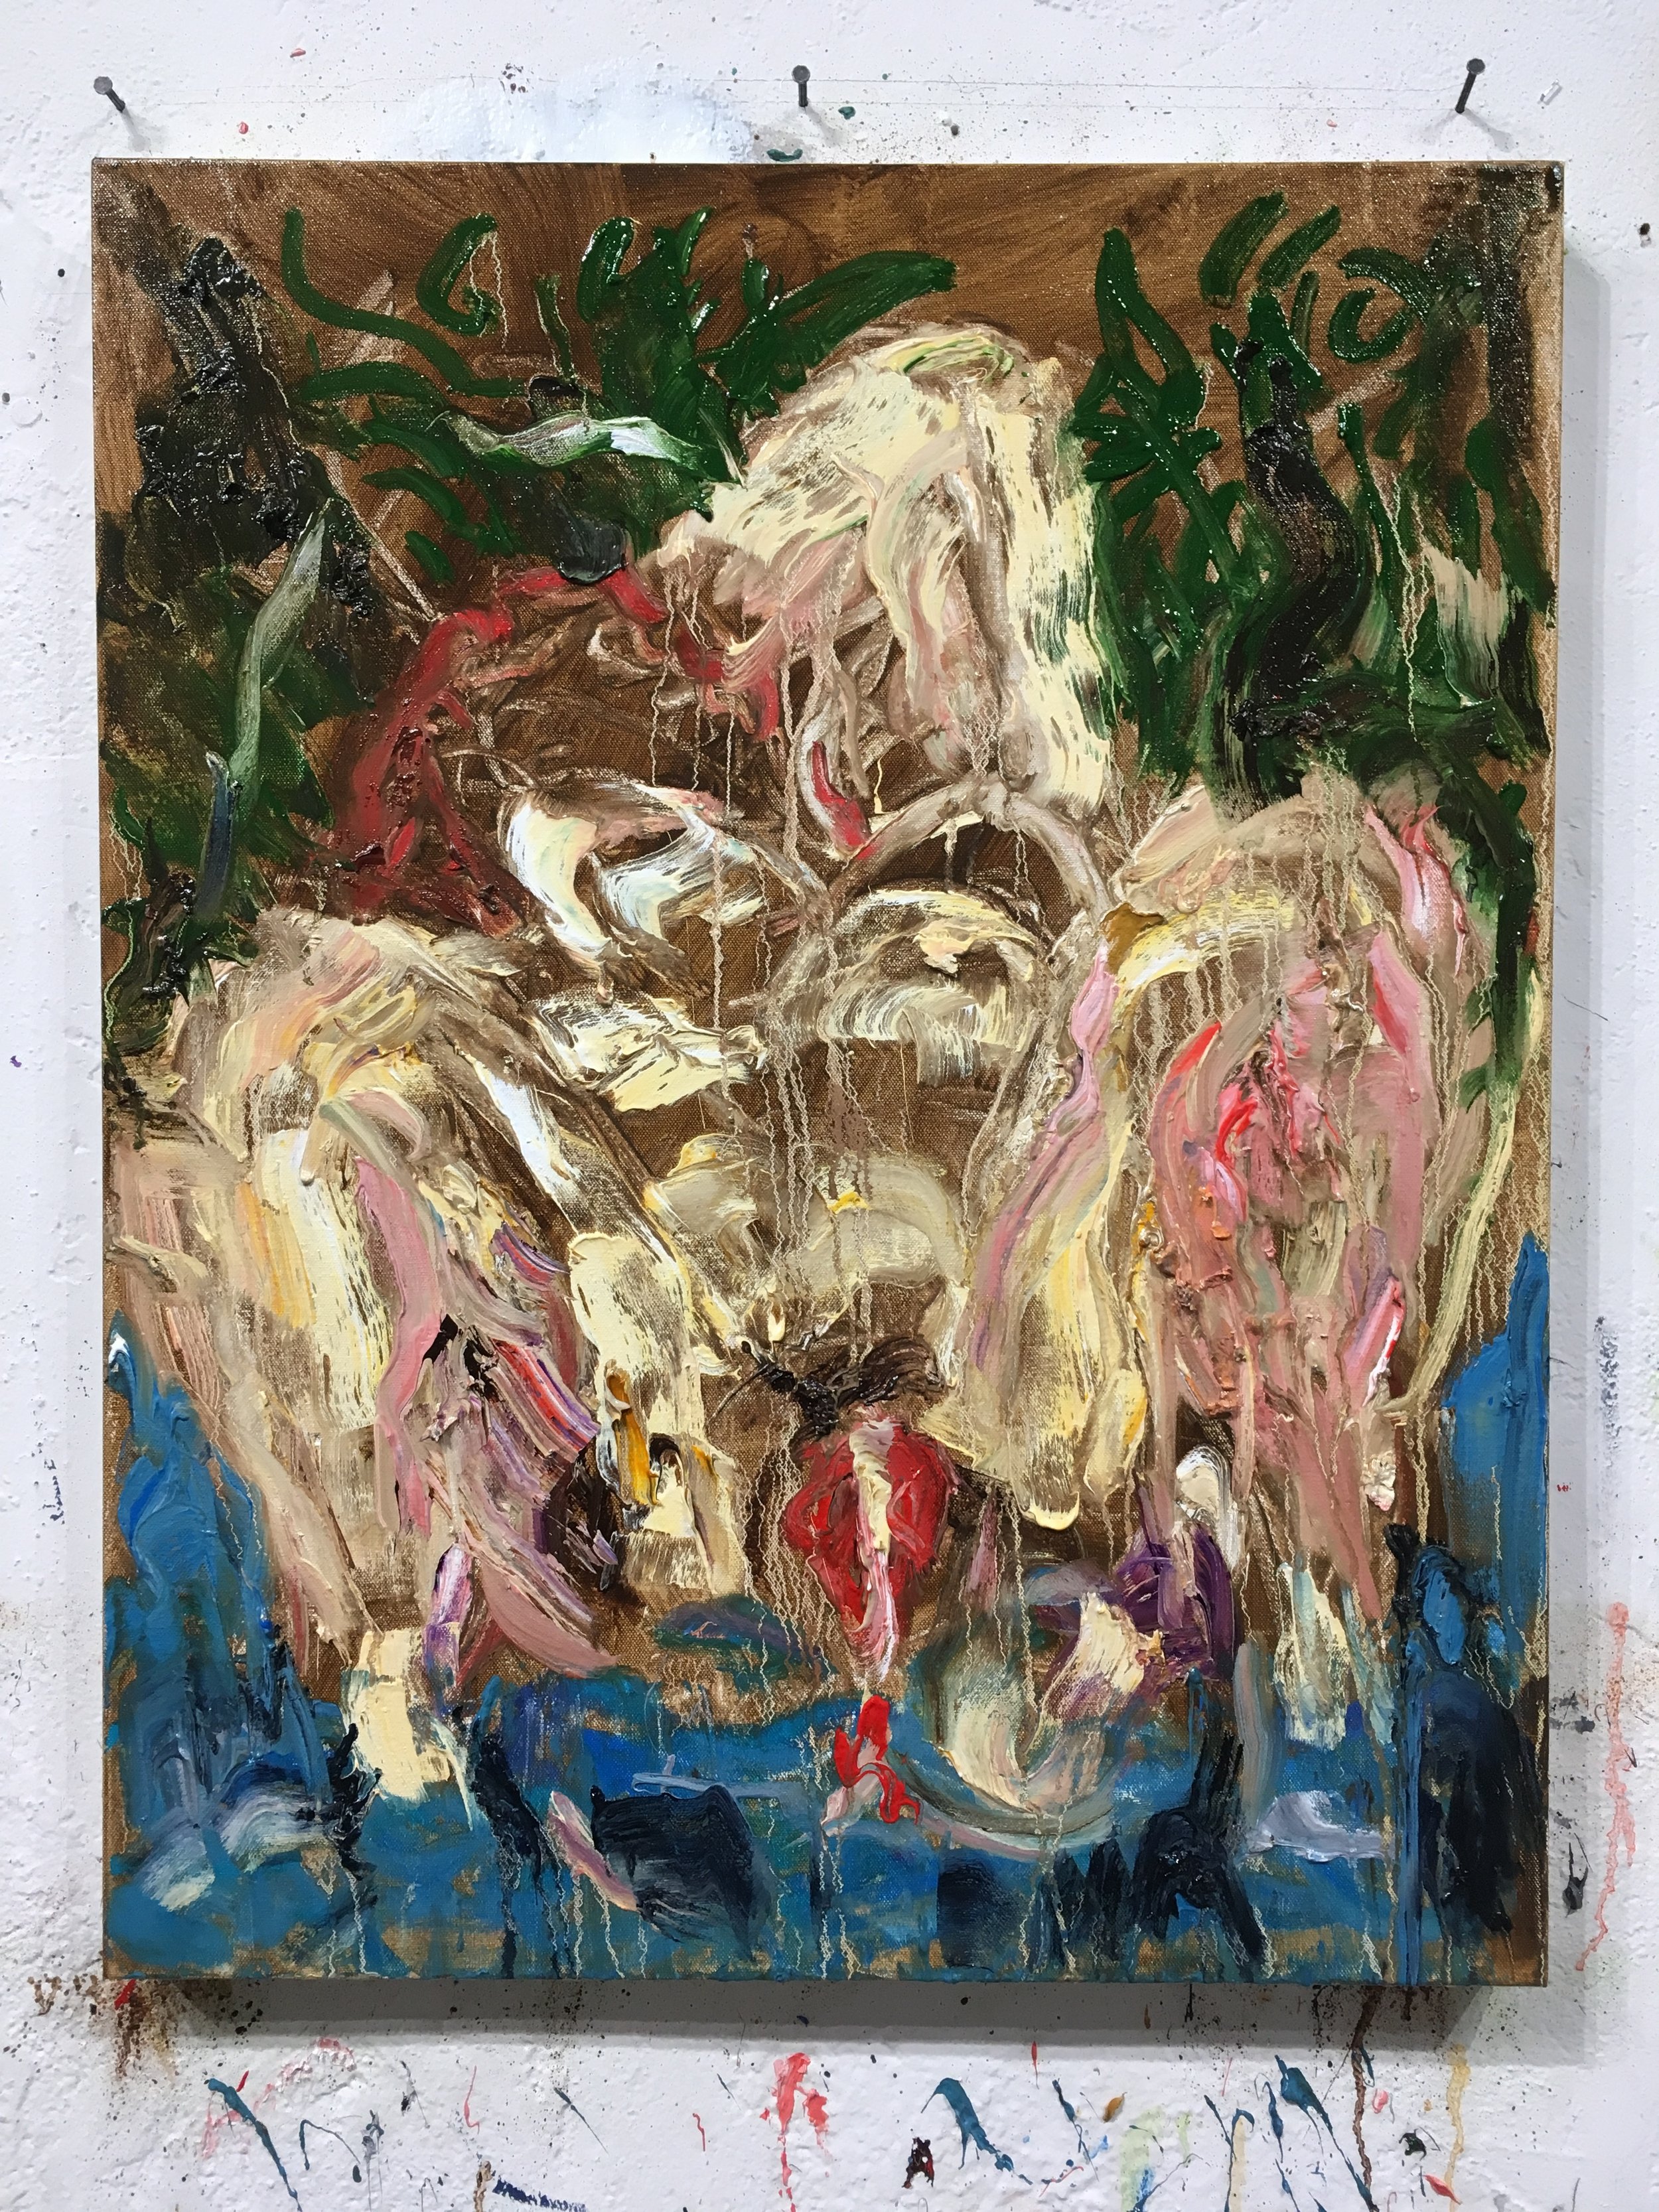  Untitled, 2016 Oil on canvas, 30 x 24 in. 